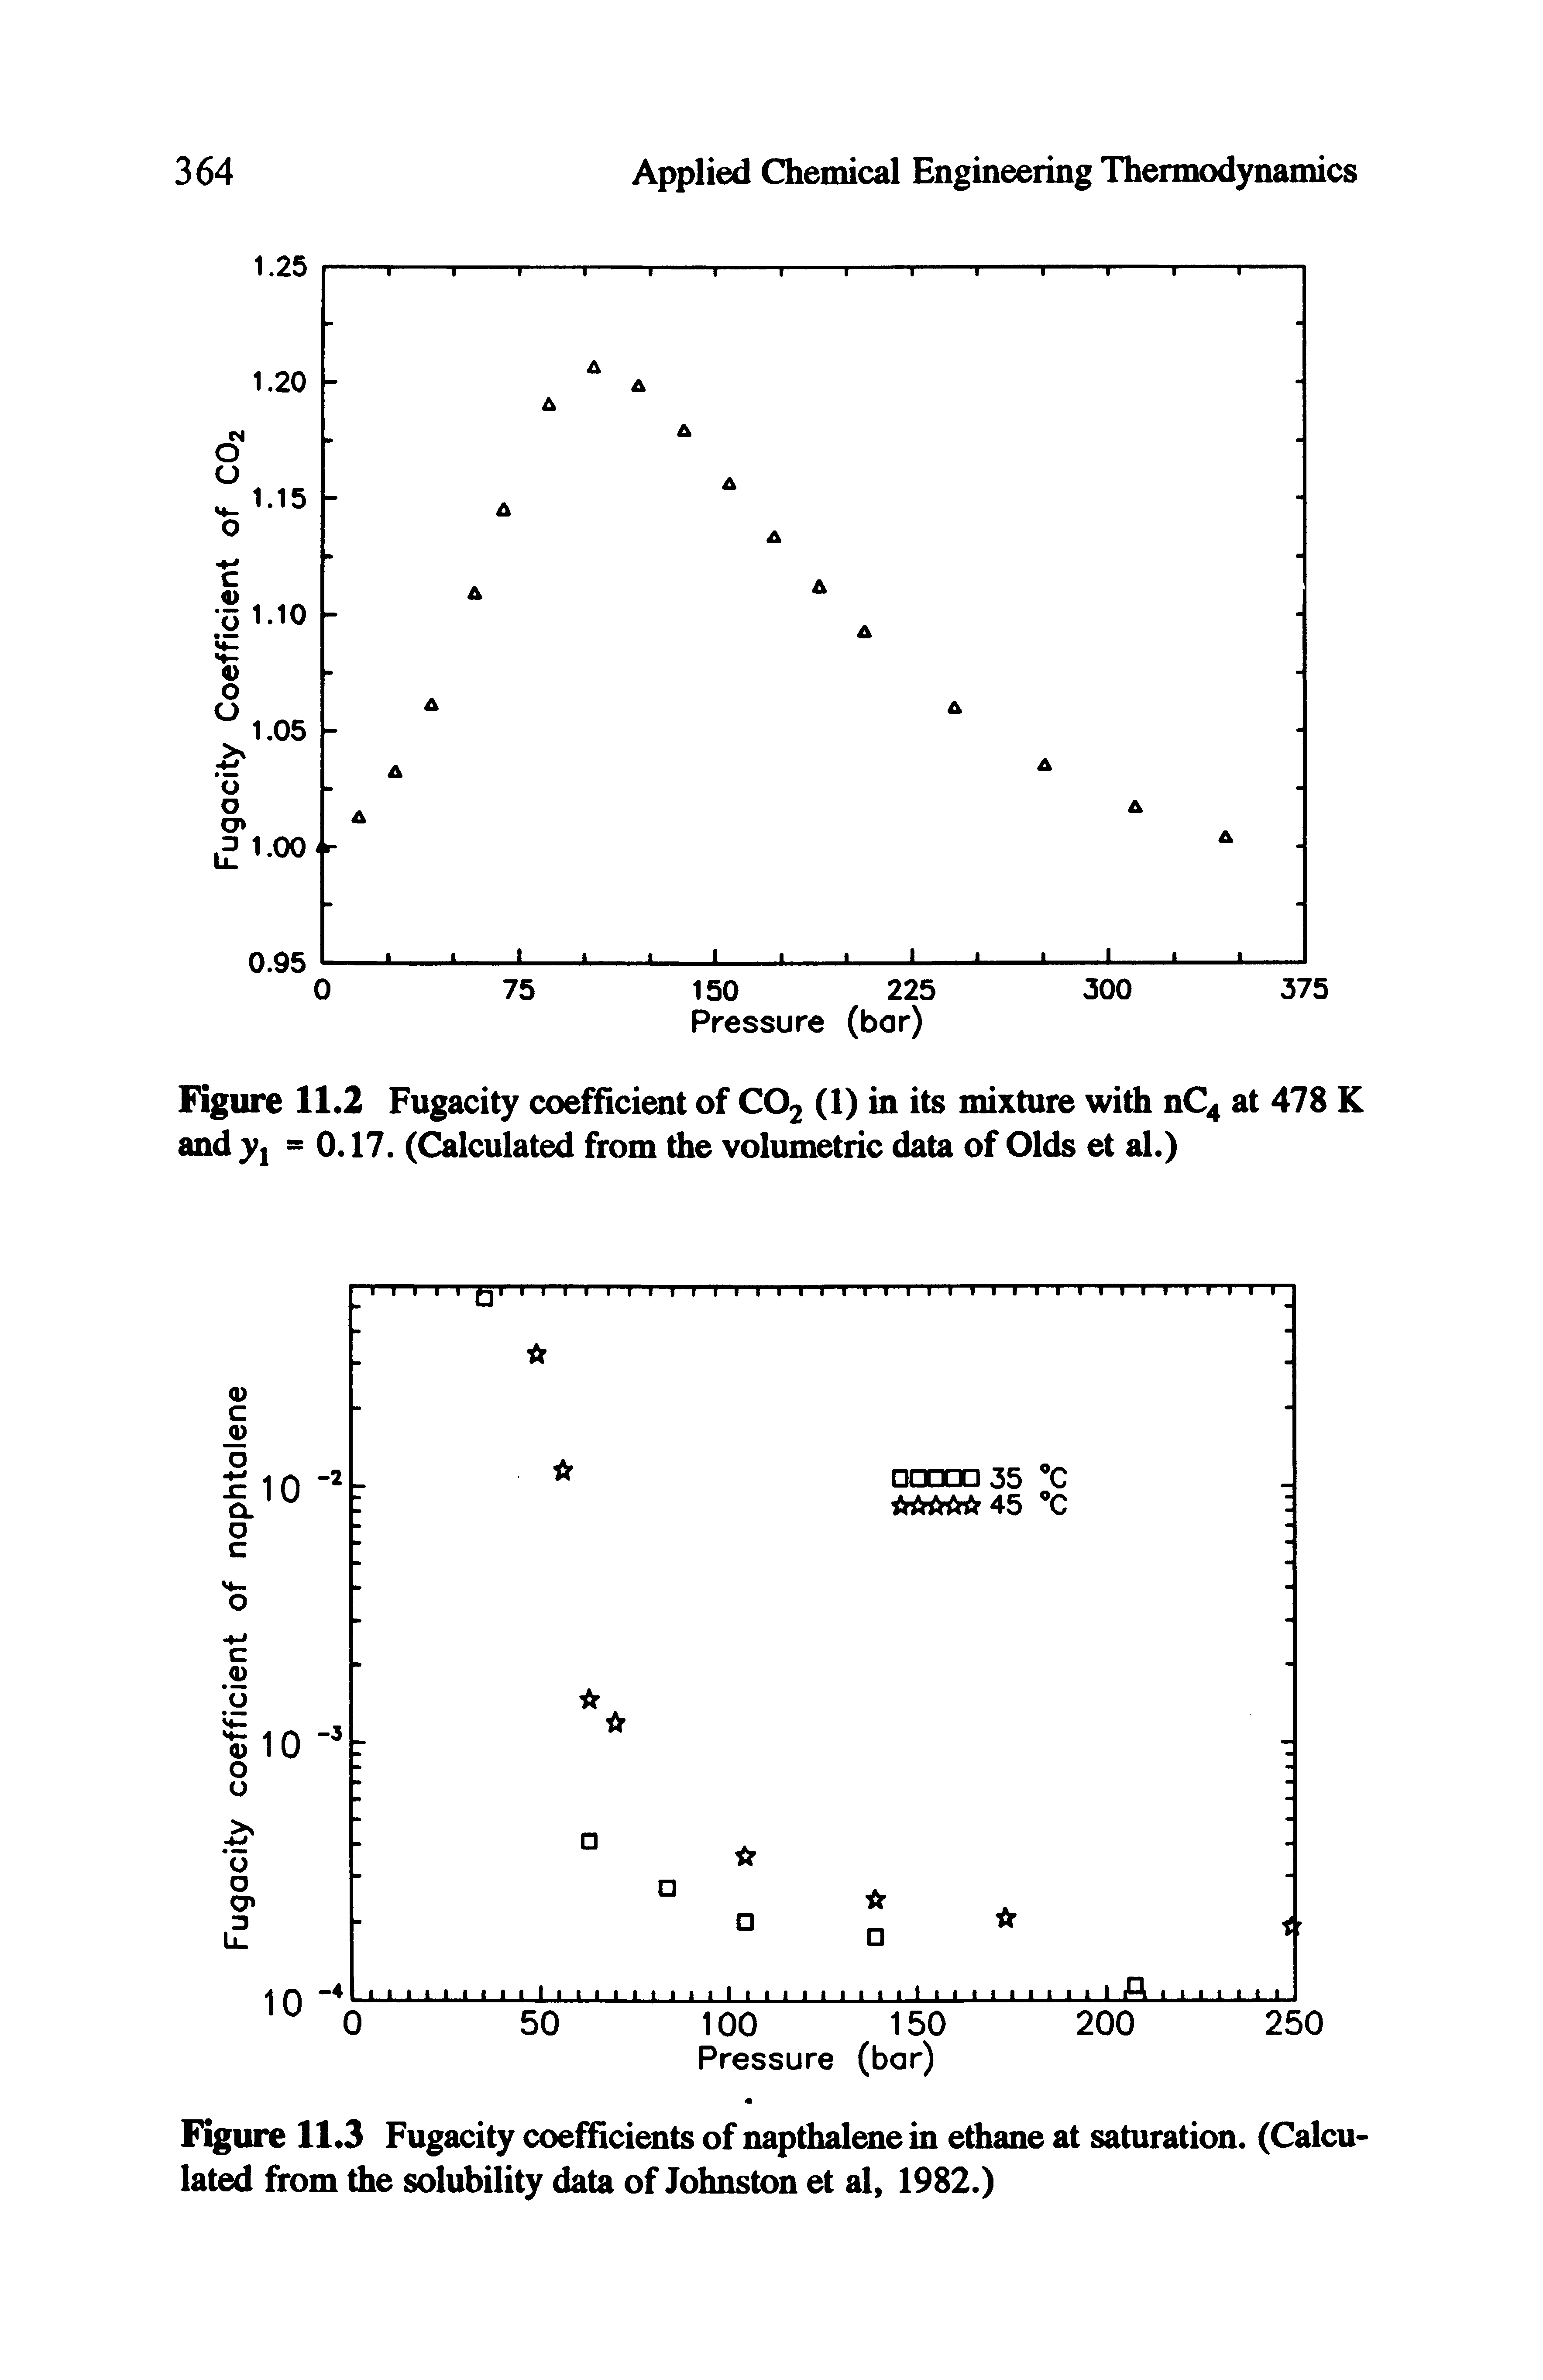 Figure 11.3 Fugacity coefficients of napthalene in ethane at saturation. (Calculated from the solubility data of Johnston et al, 1982.)...